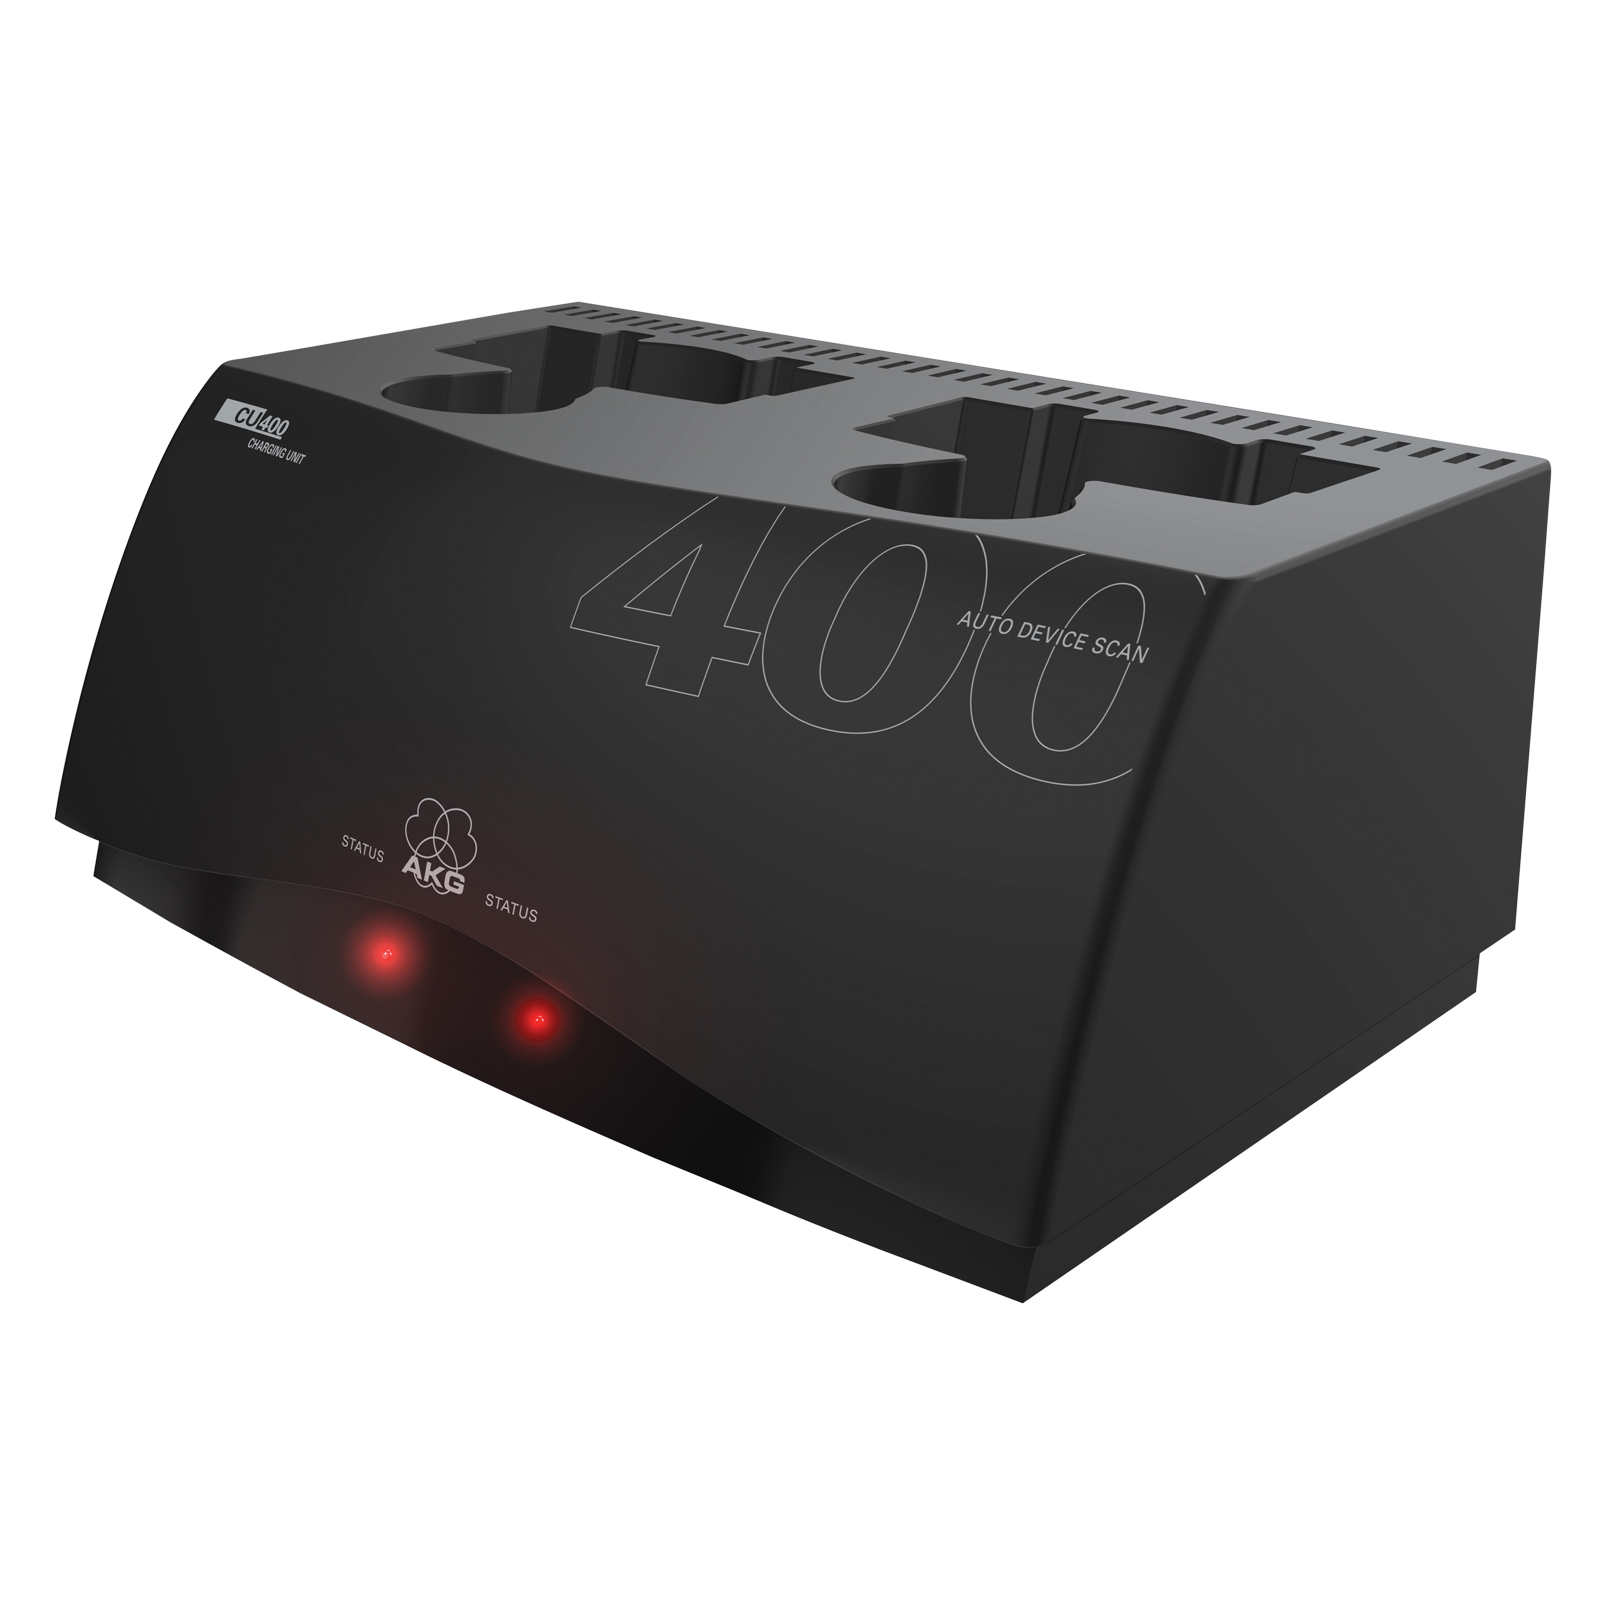 CU400 (B-Stock) - Black - Charging unit for WMS420, WMS450 and WMS470 series transmitters - Detailshot 1